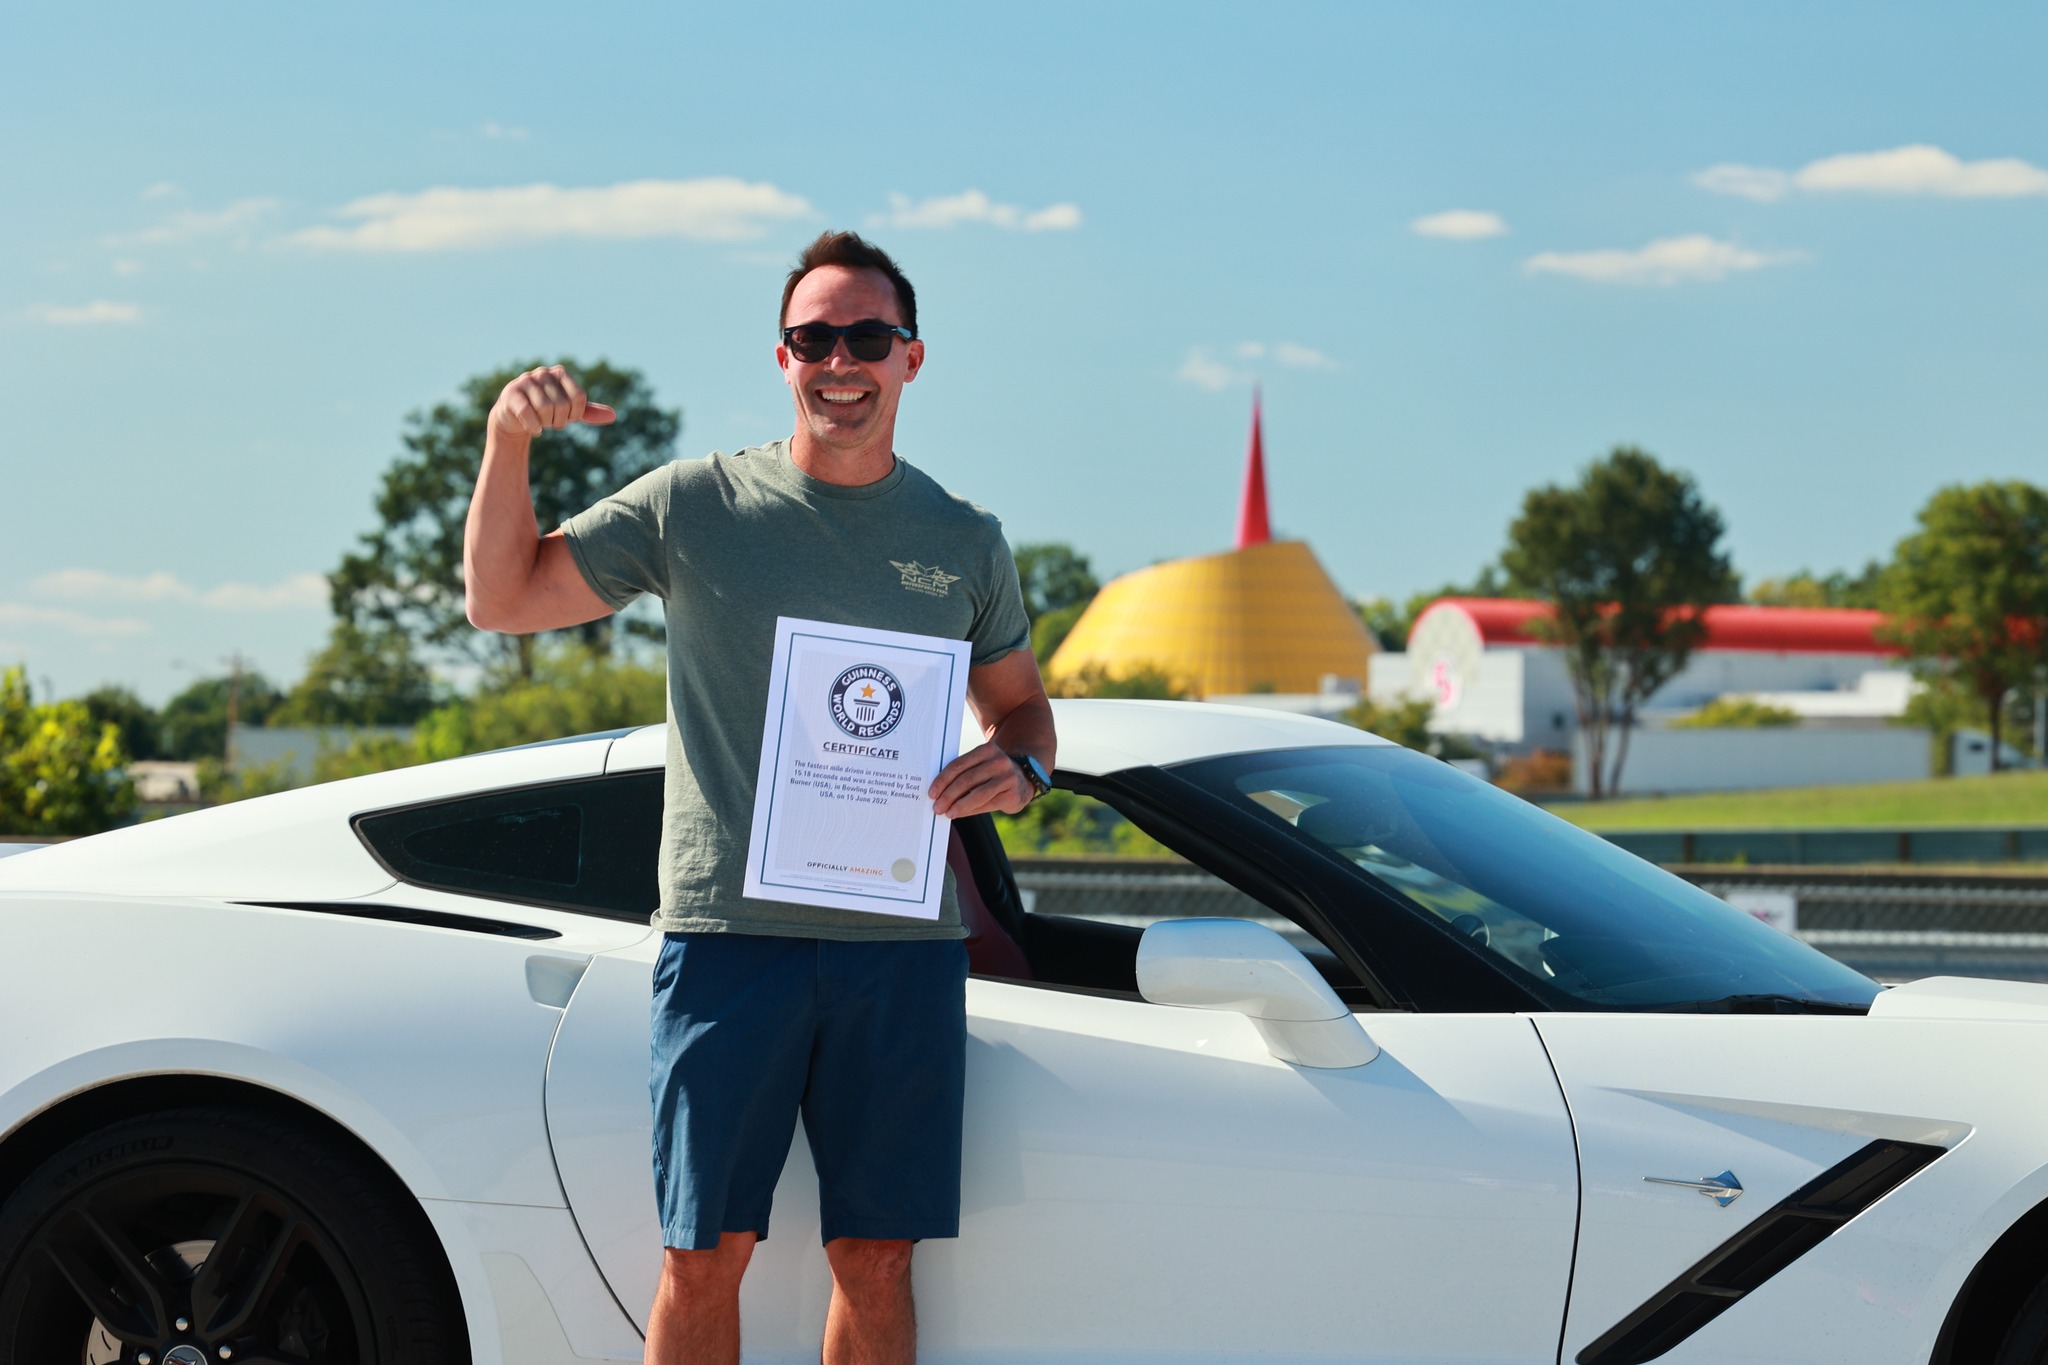 Guinness World Record set at 1:15.18 for fastest mile driven in reverse Auto Recent